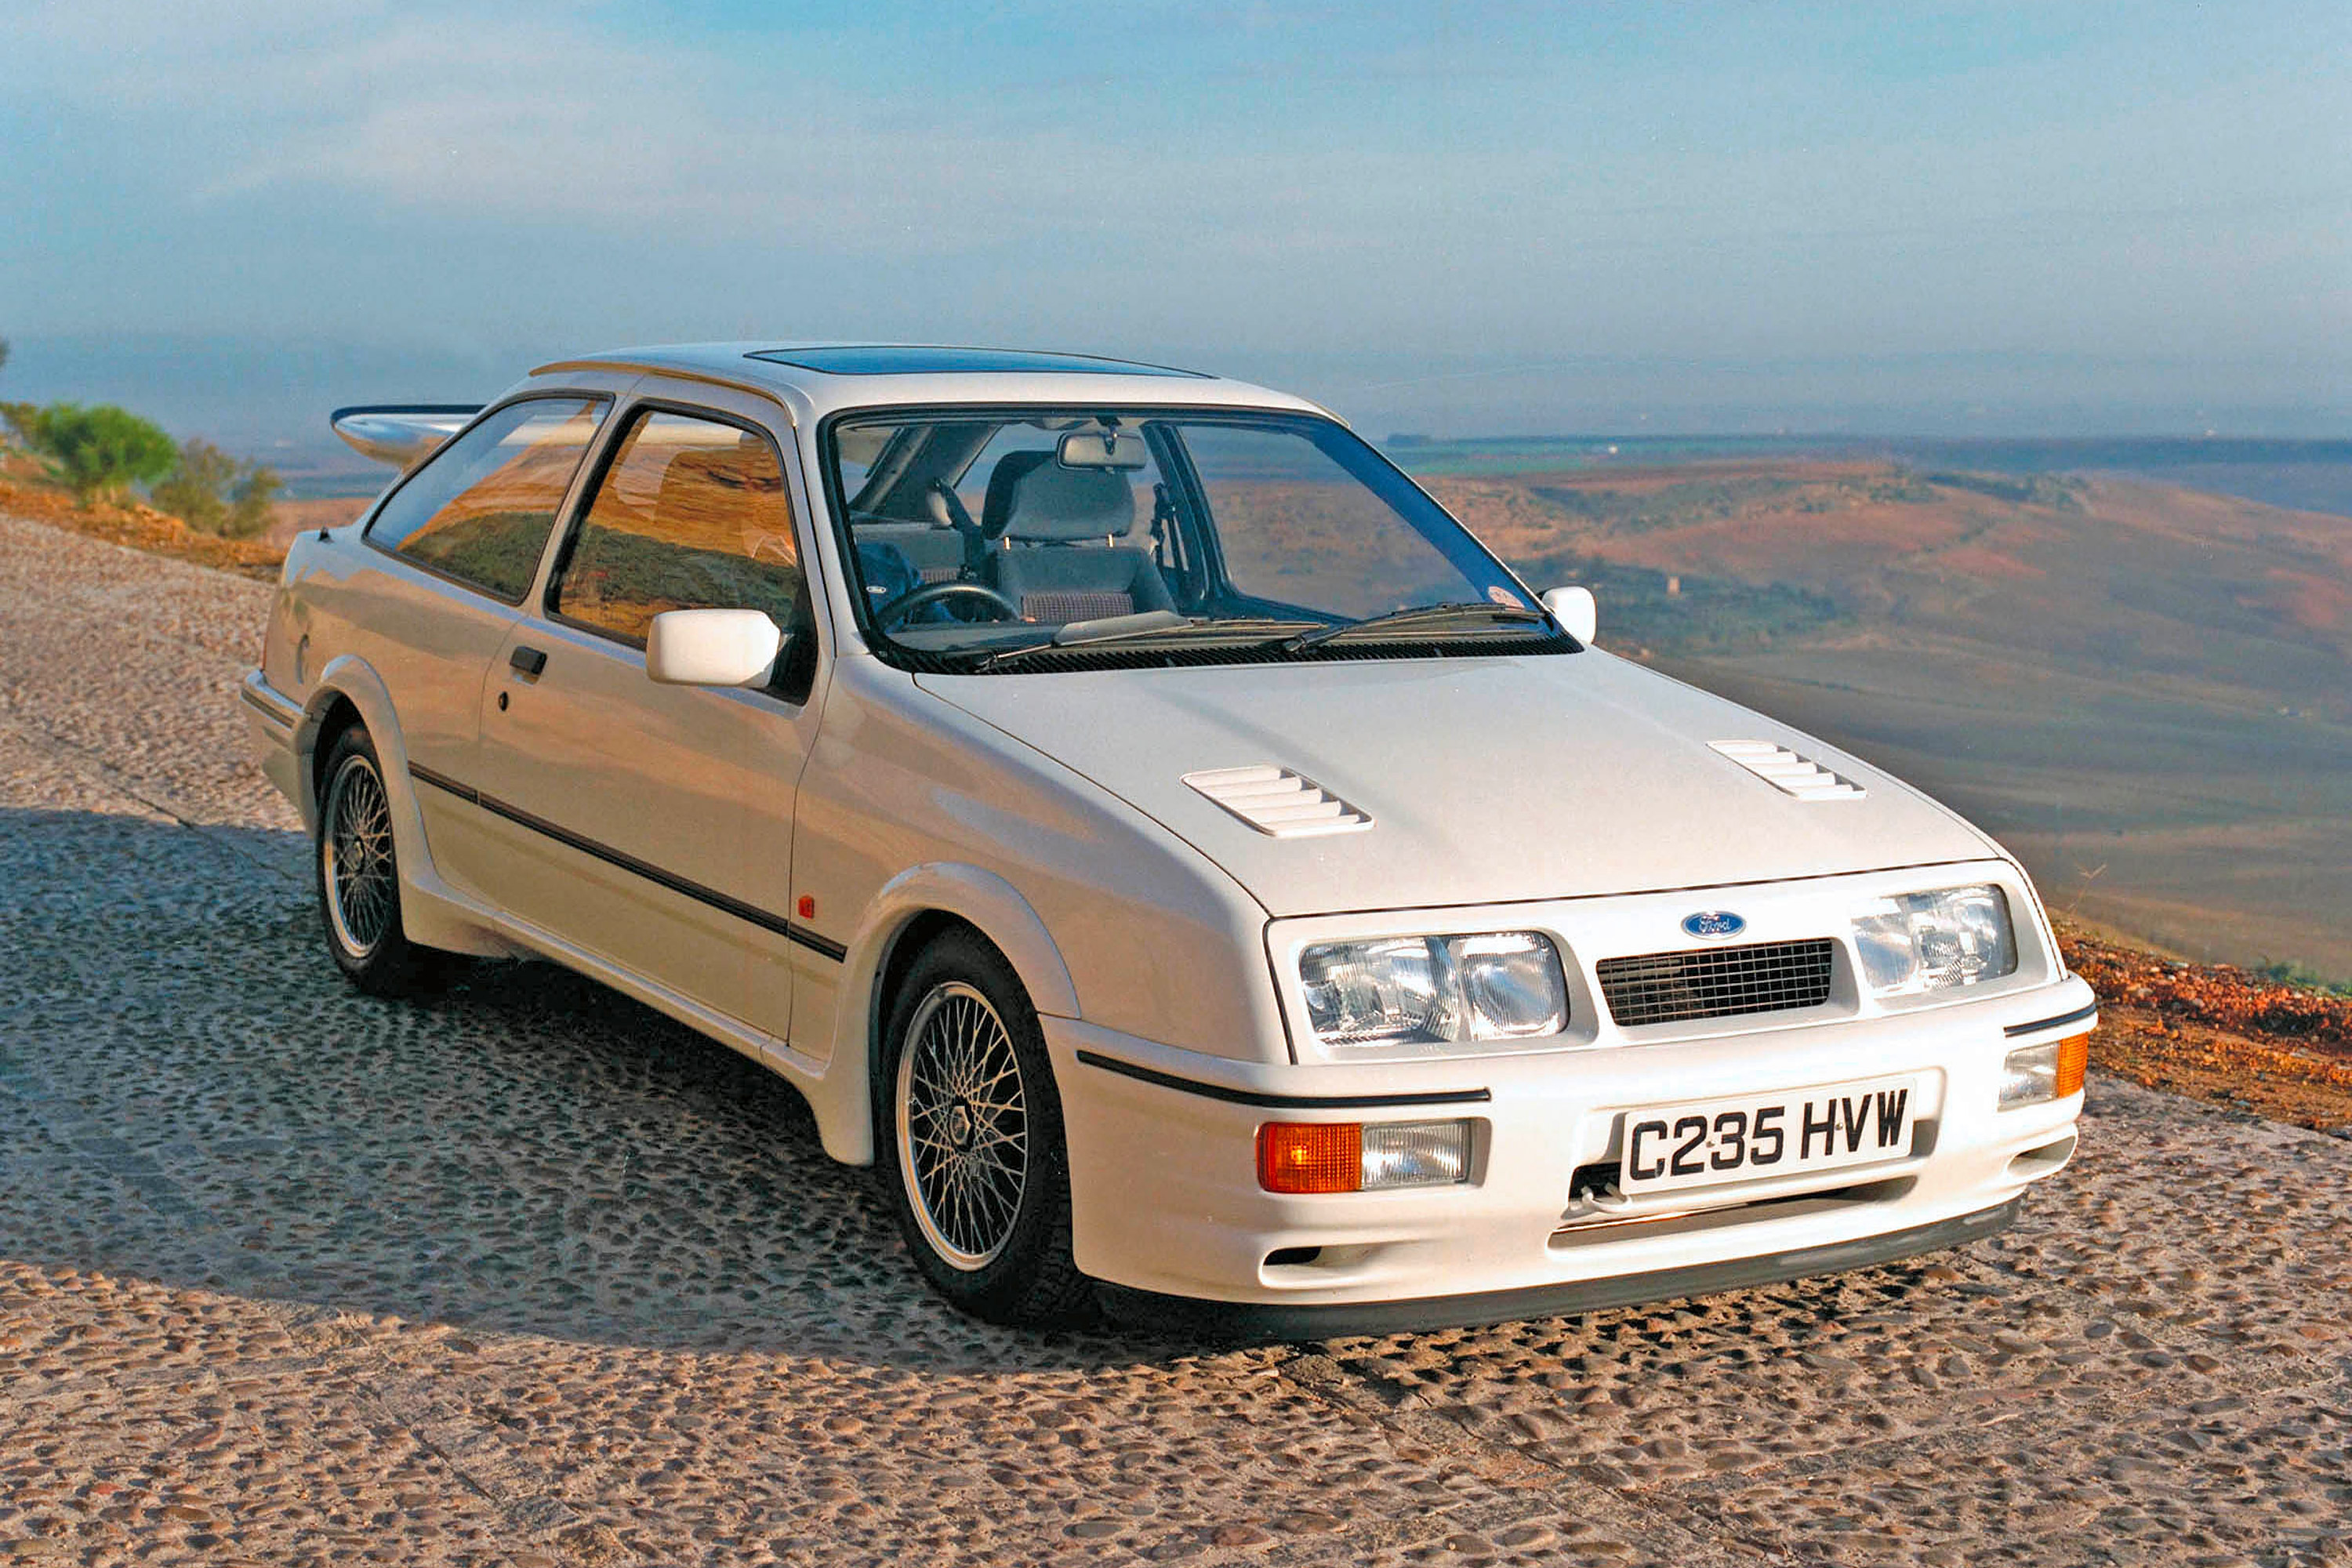  1986 Ford Sierra RS Cosworth Wallpaper.